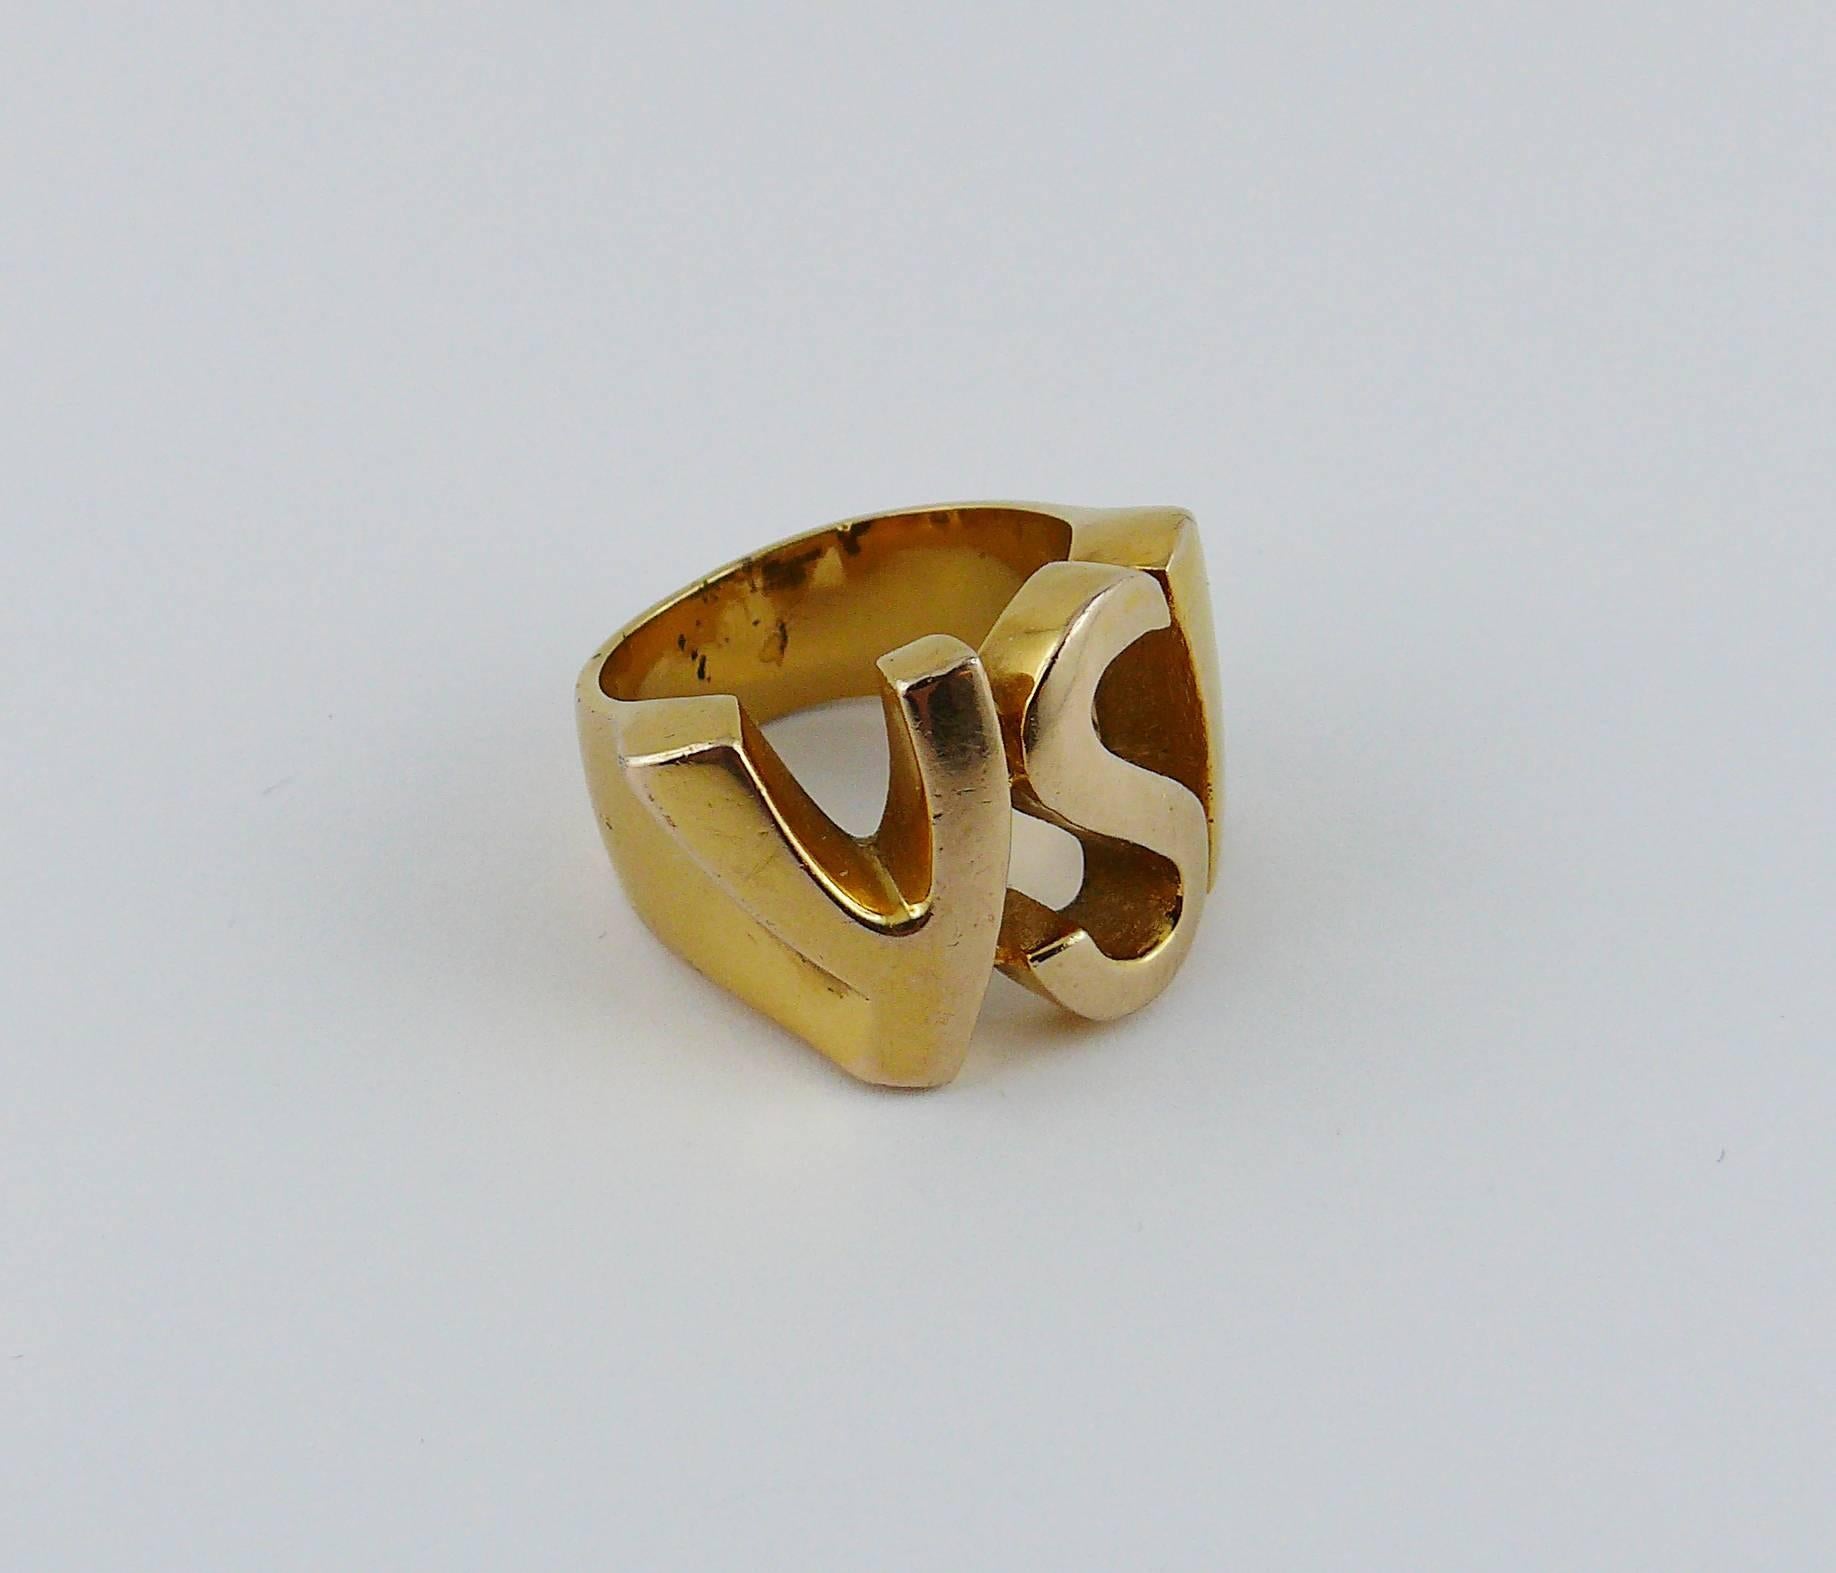 YVES SAINT LAURENT vintage gold toned signed ring featuring YSL monogram.

Embossed YSL.

Indicative measurements : inner circumference approx. 5.65 cm (2.22 inches) / logo width approx. 1.6 cm (0.63 inch).

JEWELRY CONDITION CHART
- New or never